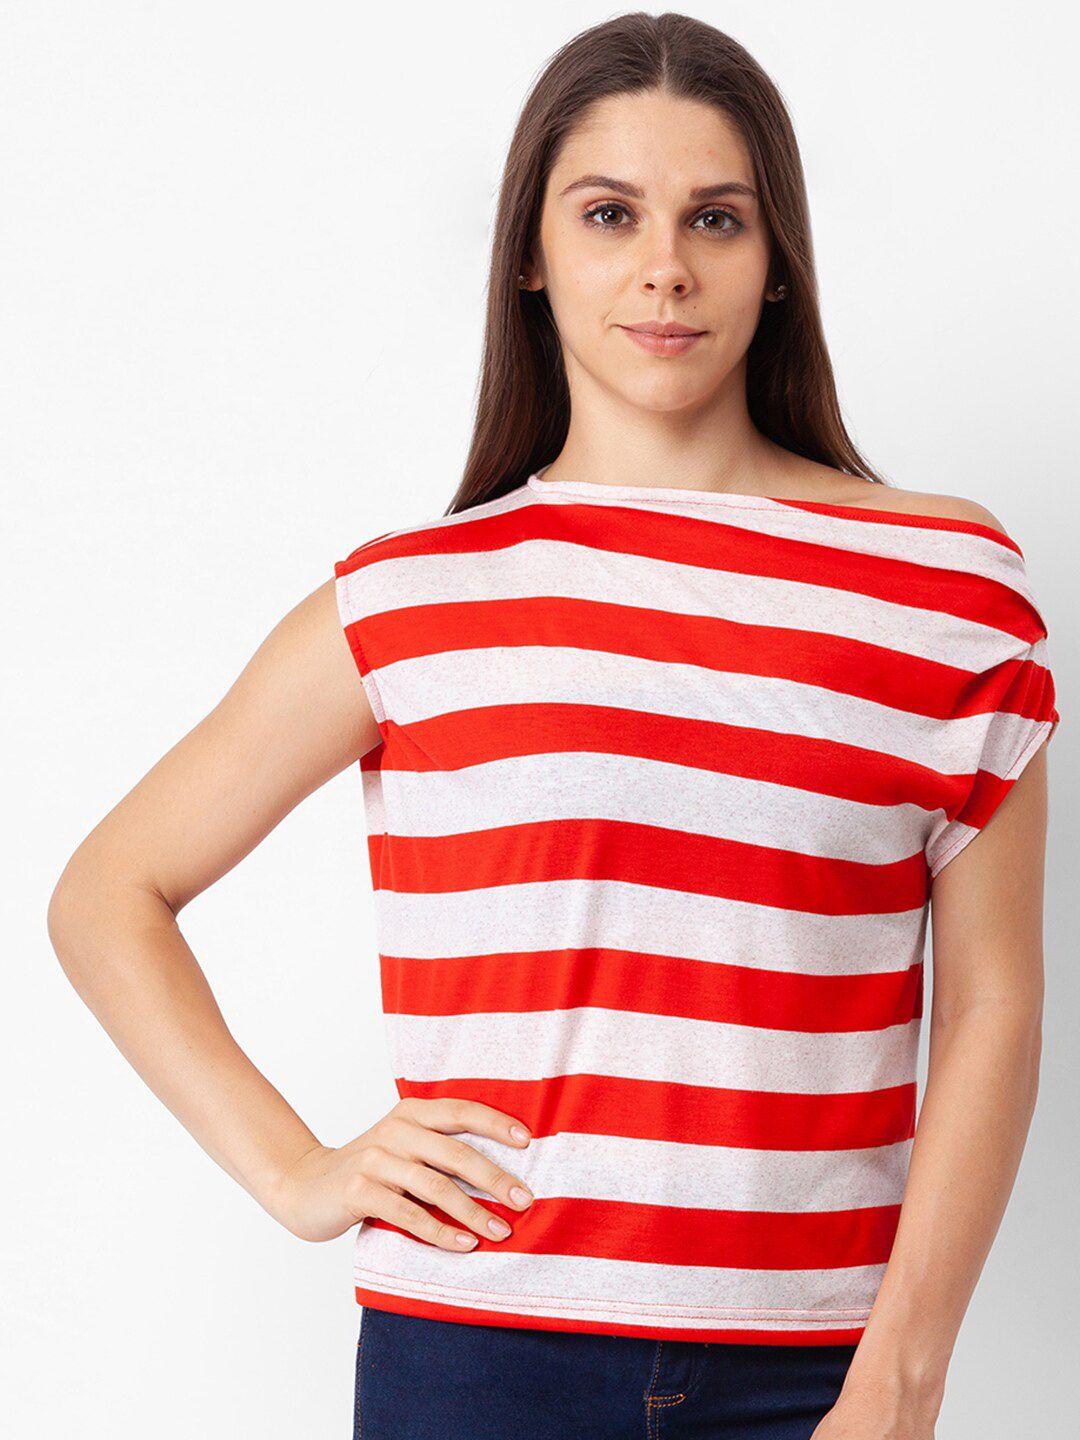 globus red & bright gray striped top